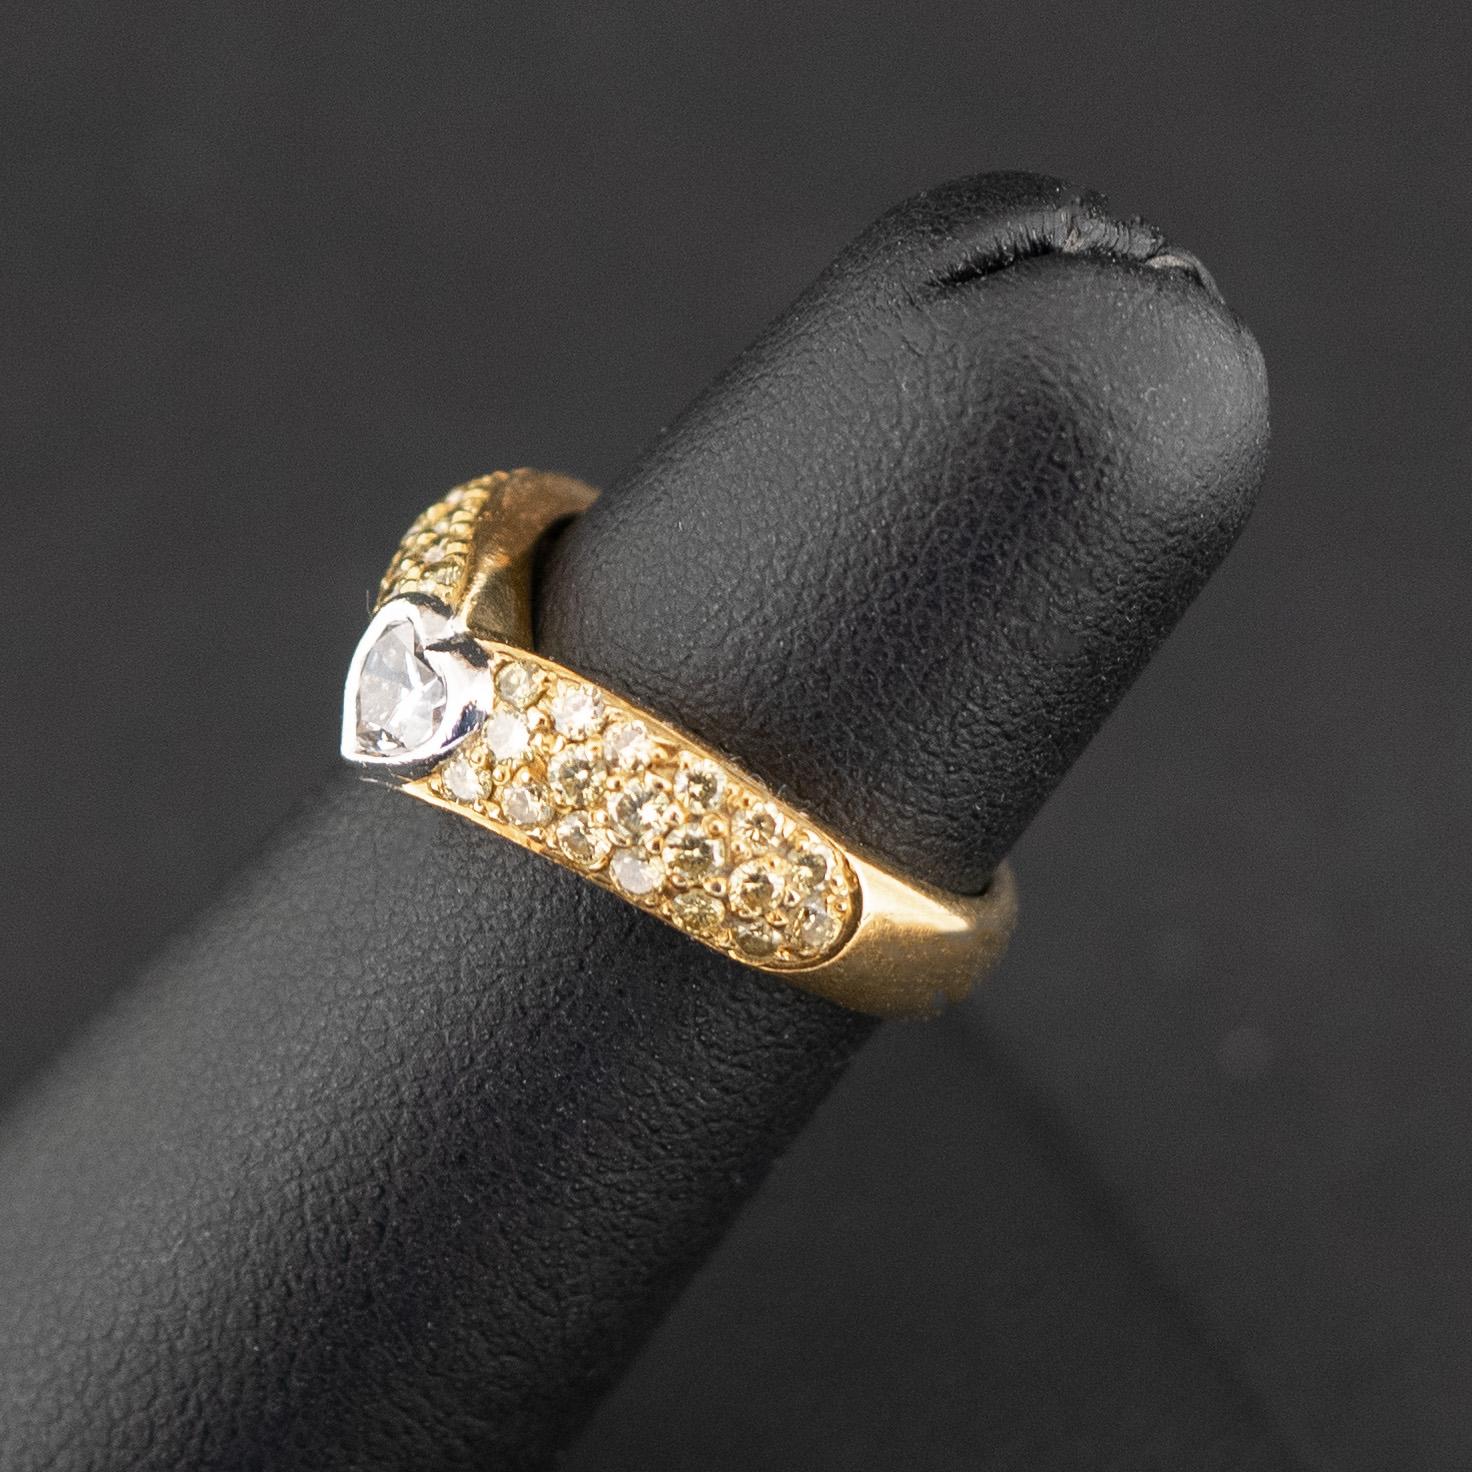 Condition: Pre-owned with mild/light scratches
Material: 18ct Yellow Gold 
Main Stone: 0.25ct Heart-shaped Diamond
Main Diamond Clarity: VS-Si1
Main Diamond Colour: H-I
Secondary Diamonds: Pave set SI-I1 yellow tinted diamonds
Item Weight: